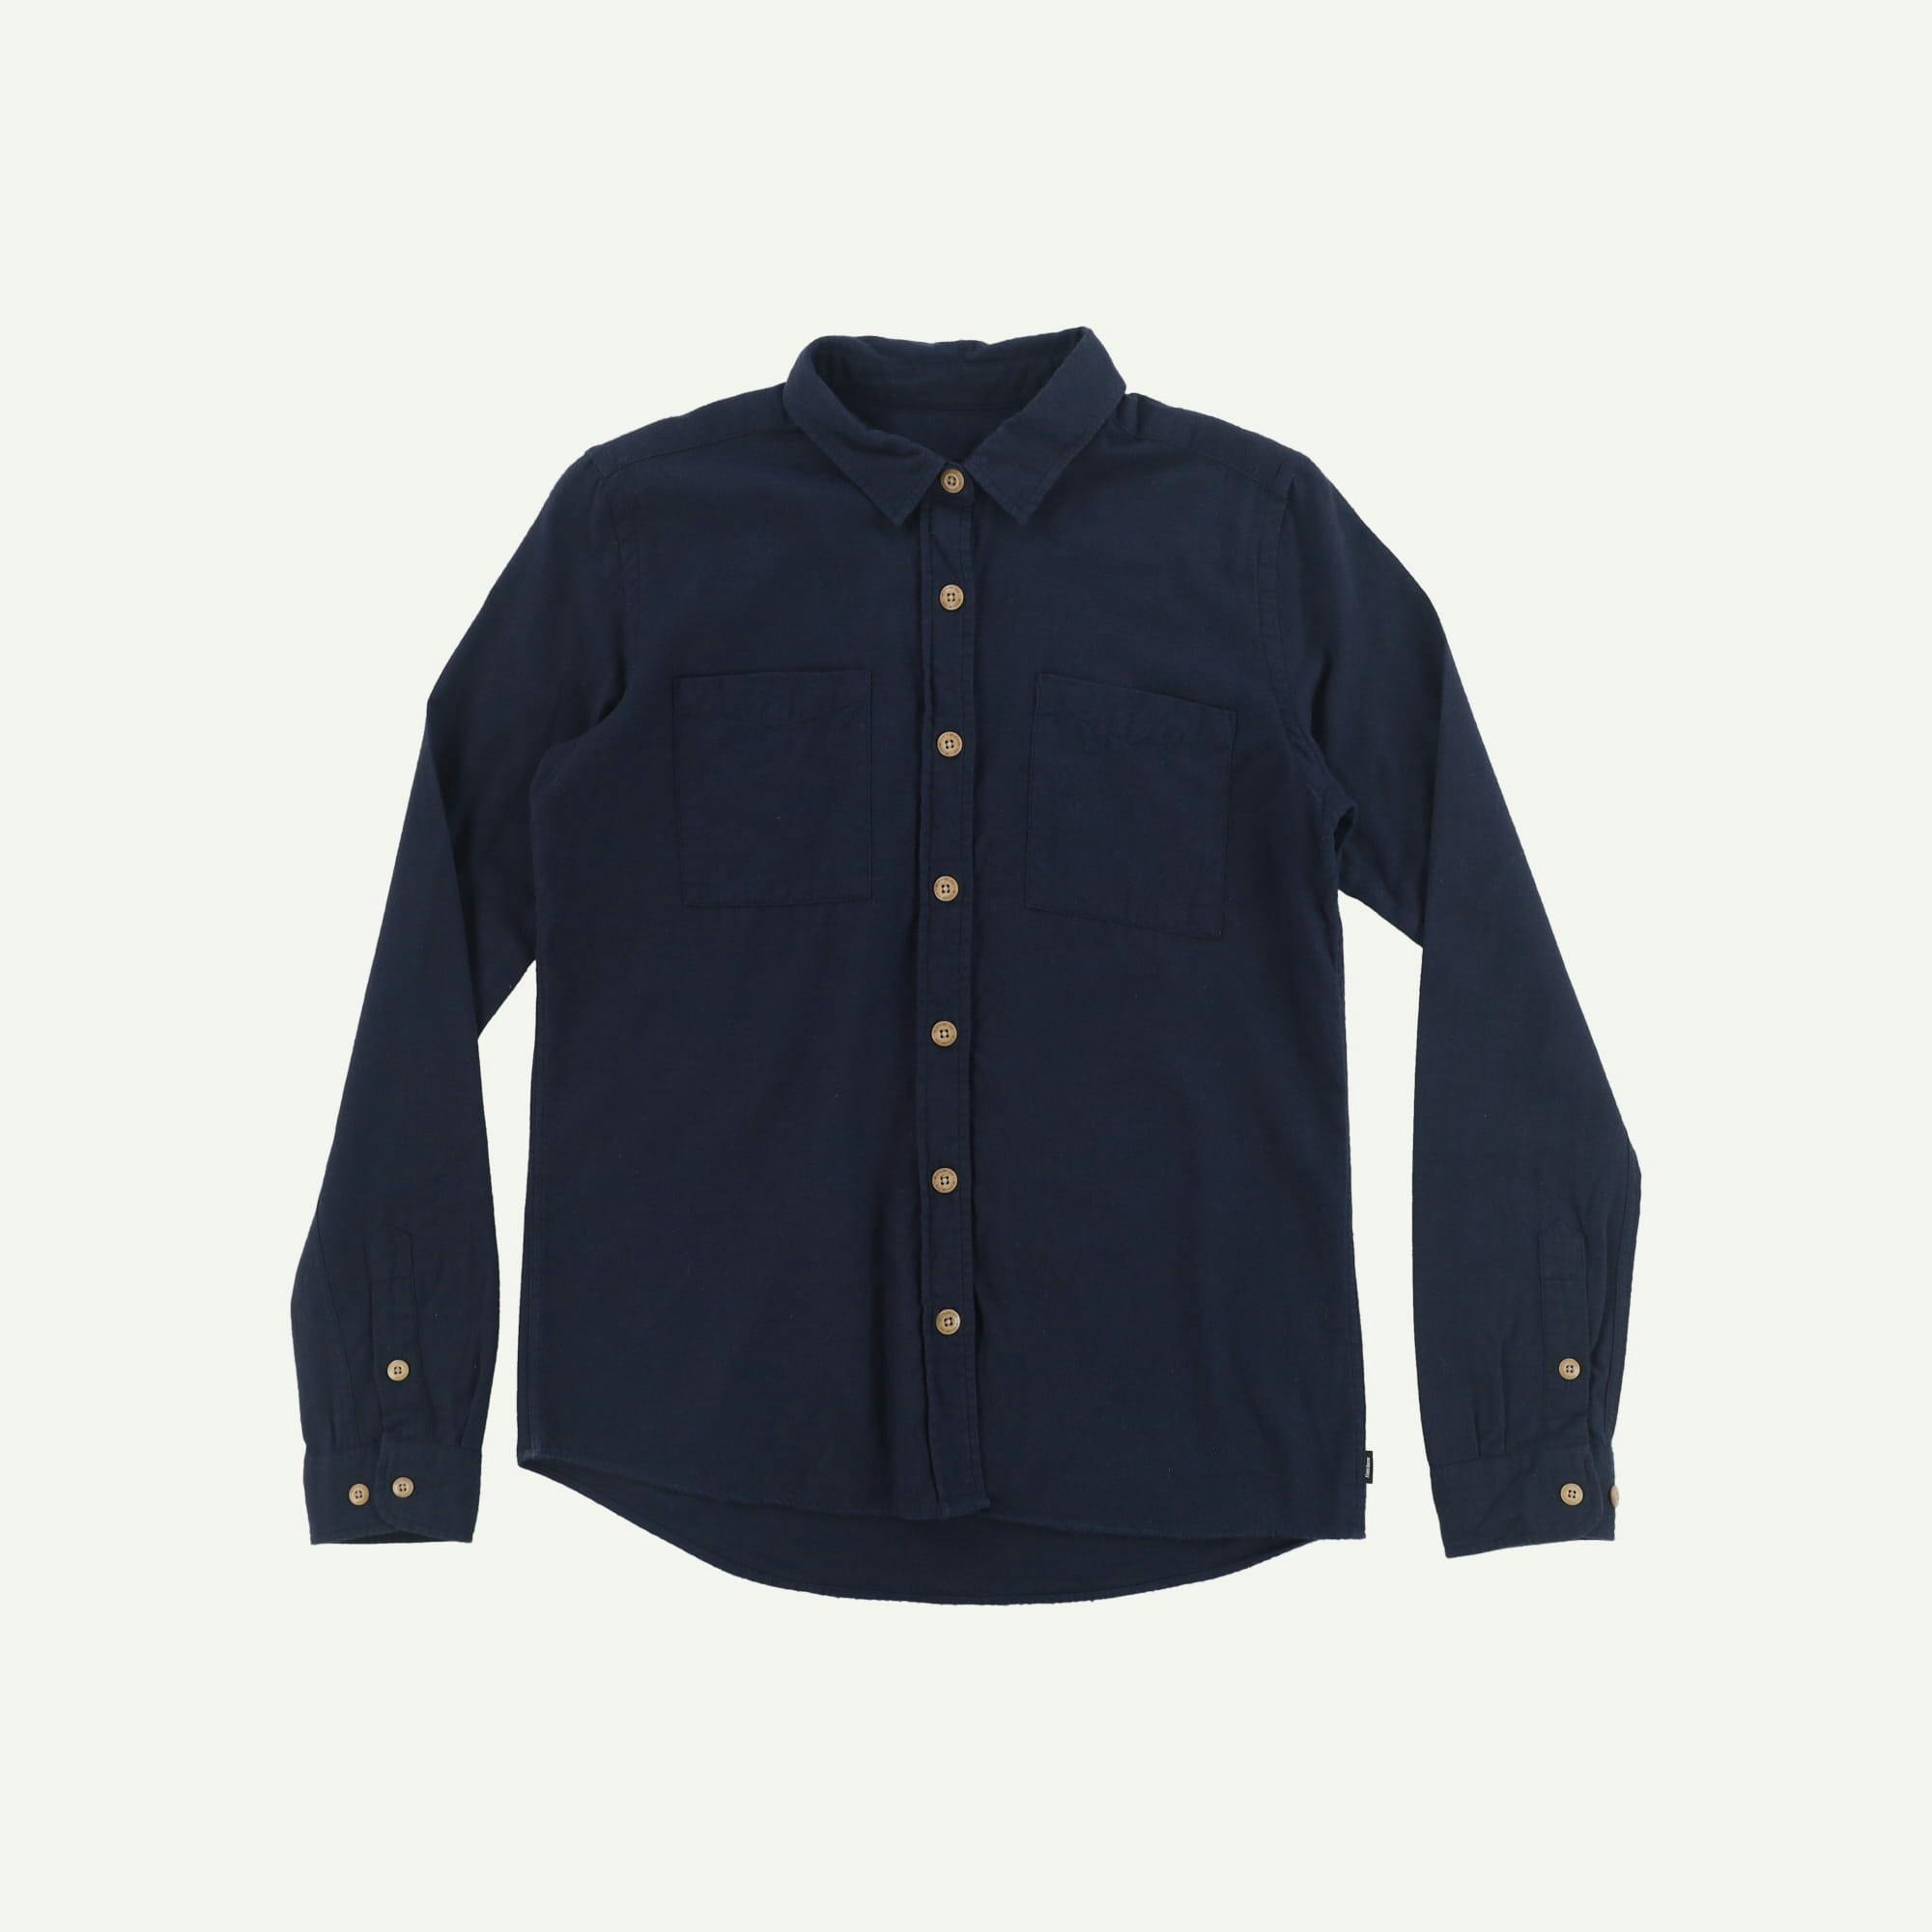 Finisterre As new Navy Shirt